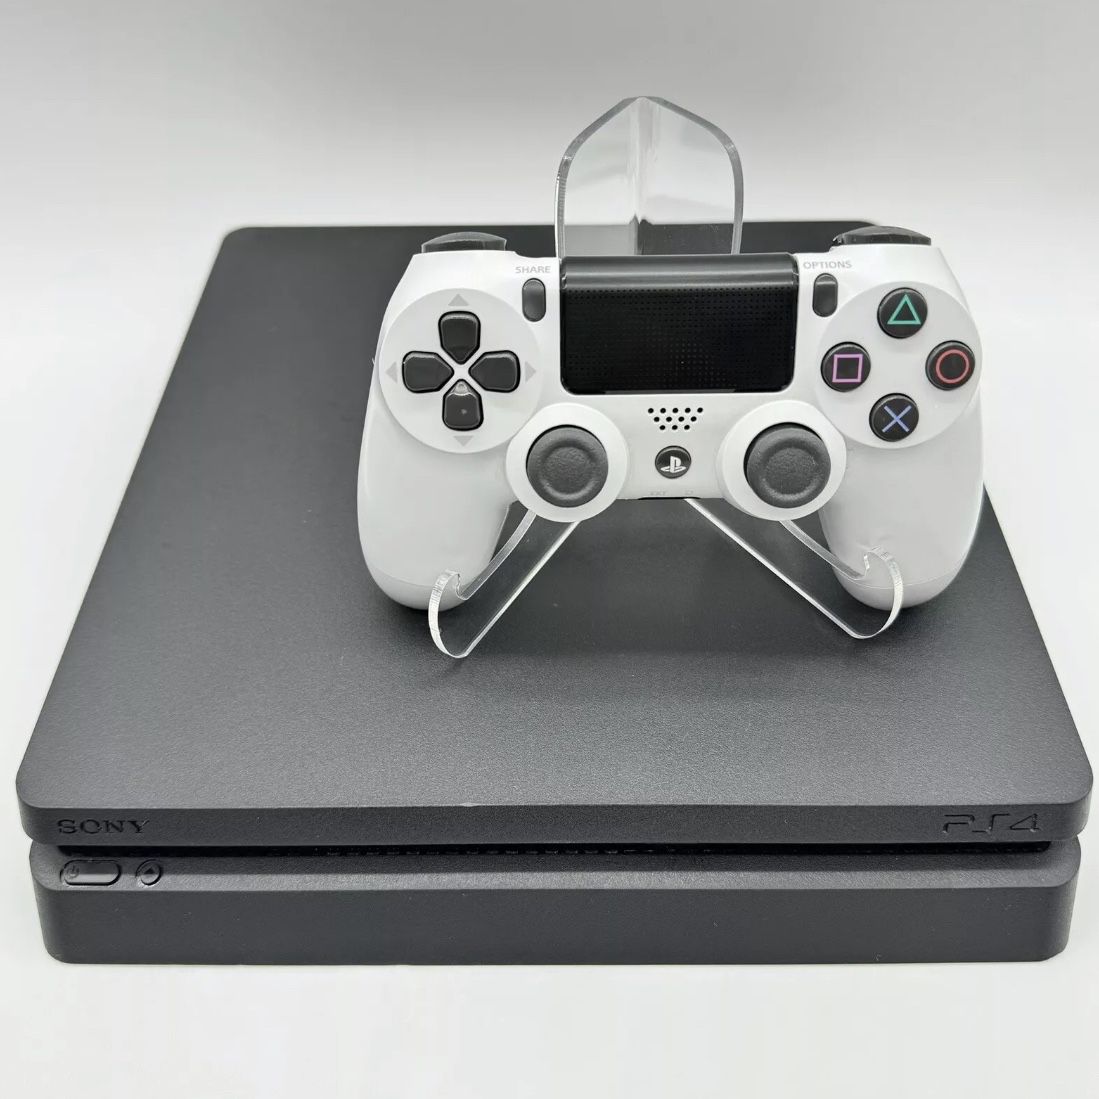 PlayStation 4 PS4 SLIM 1 TB WITH WIRES AND CONTROLLER